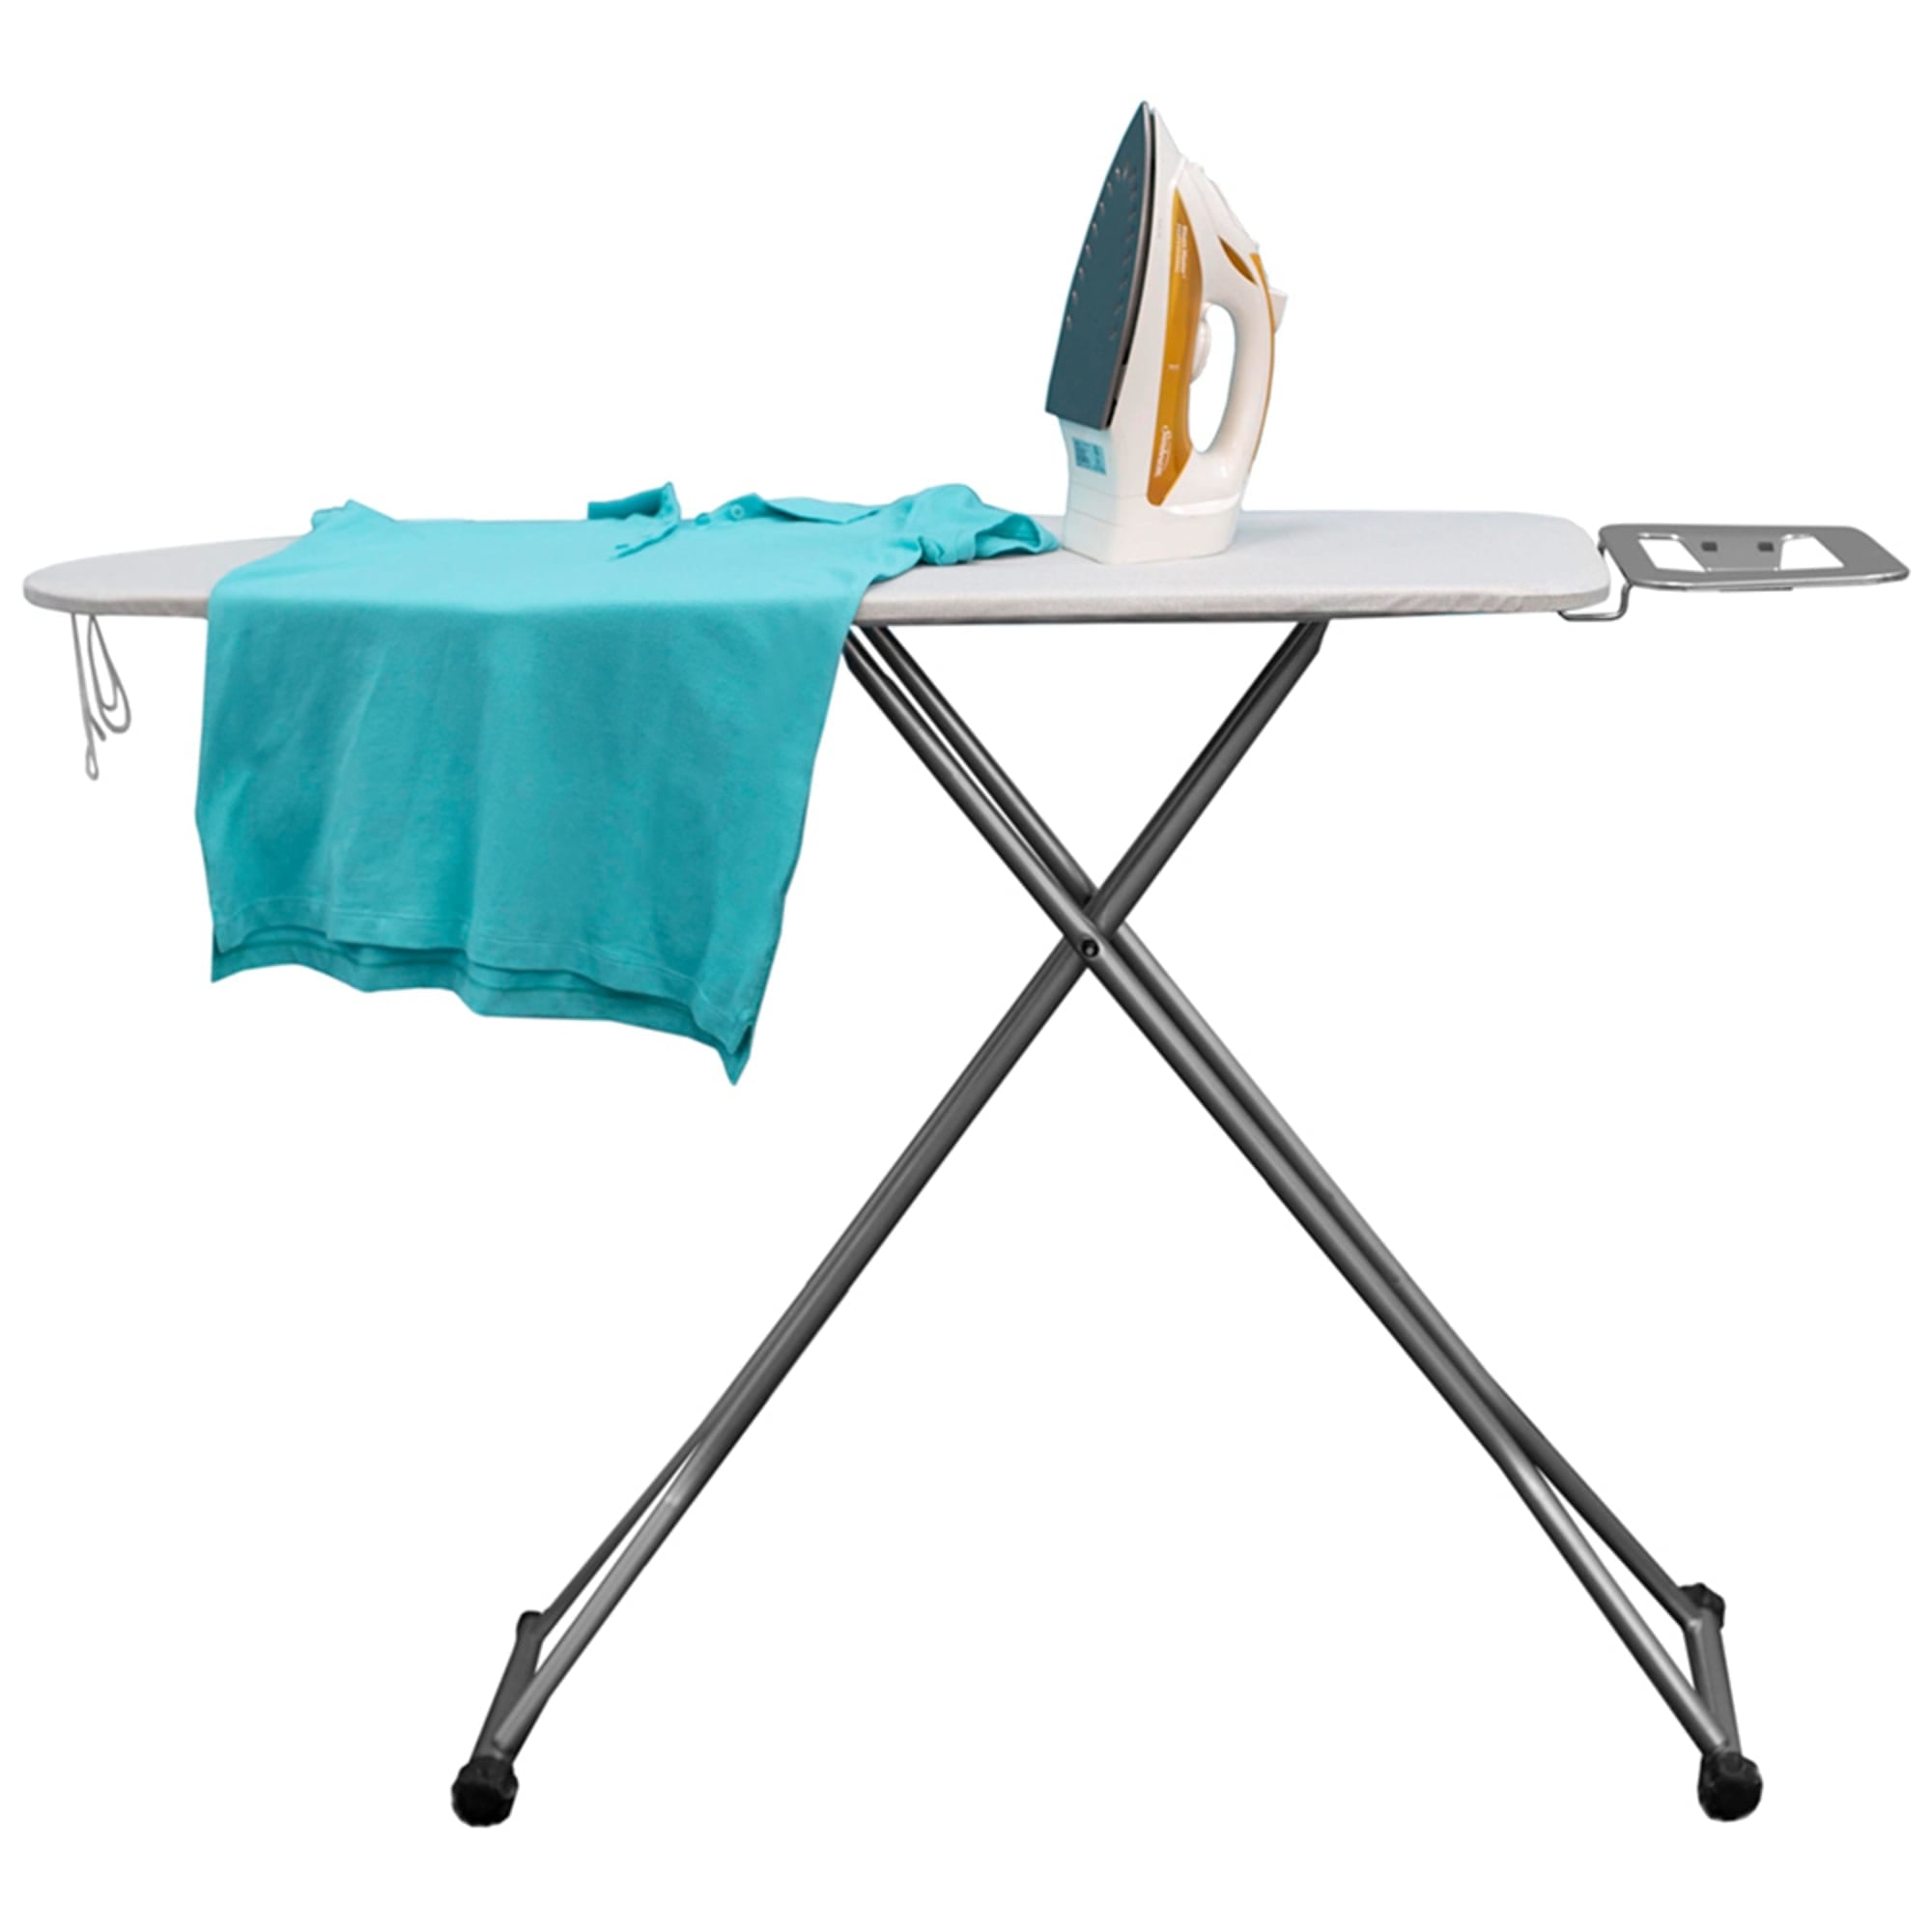 Sunbeam Adjustable Free Standing Ironing Board with Iron Rest, Silver $25.00 EACH, CASE PACK OF 4